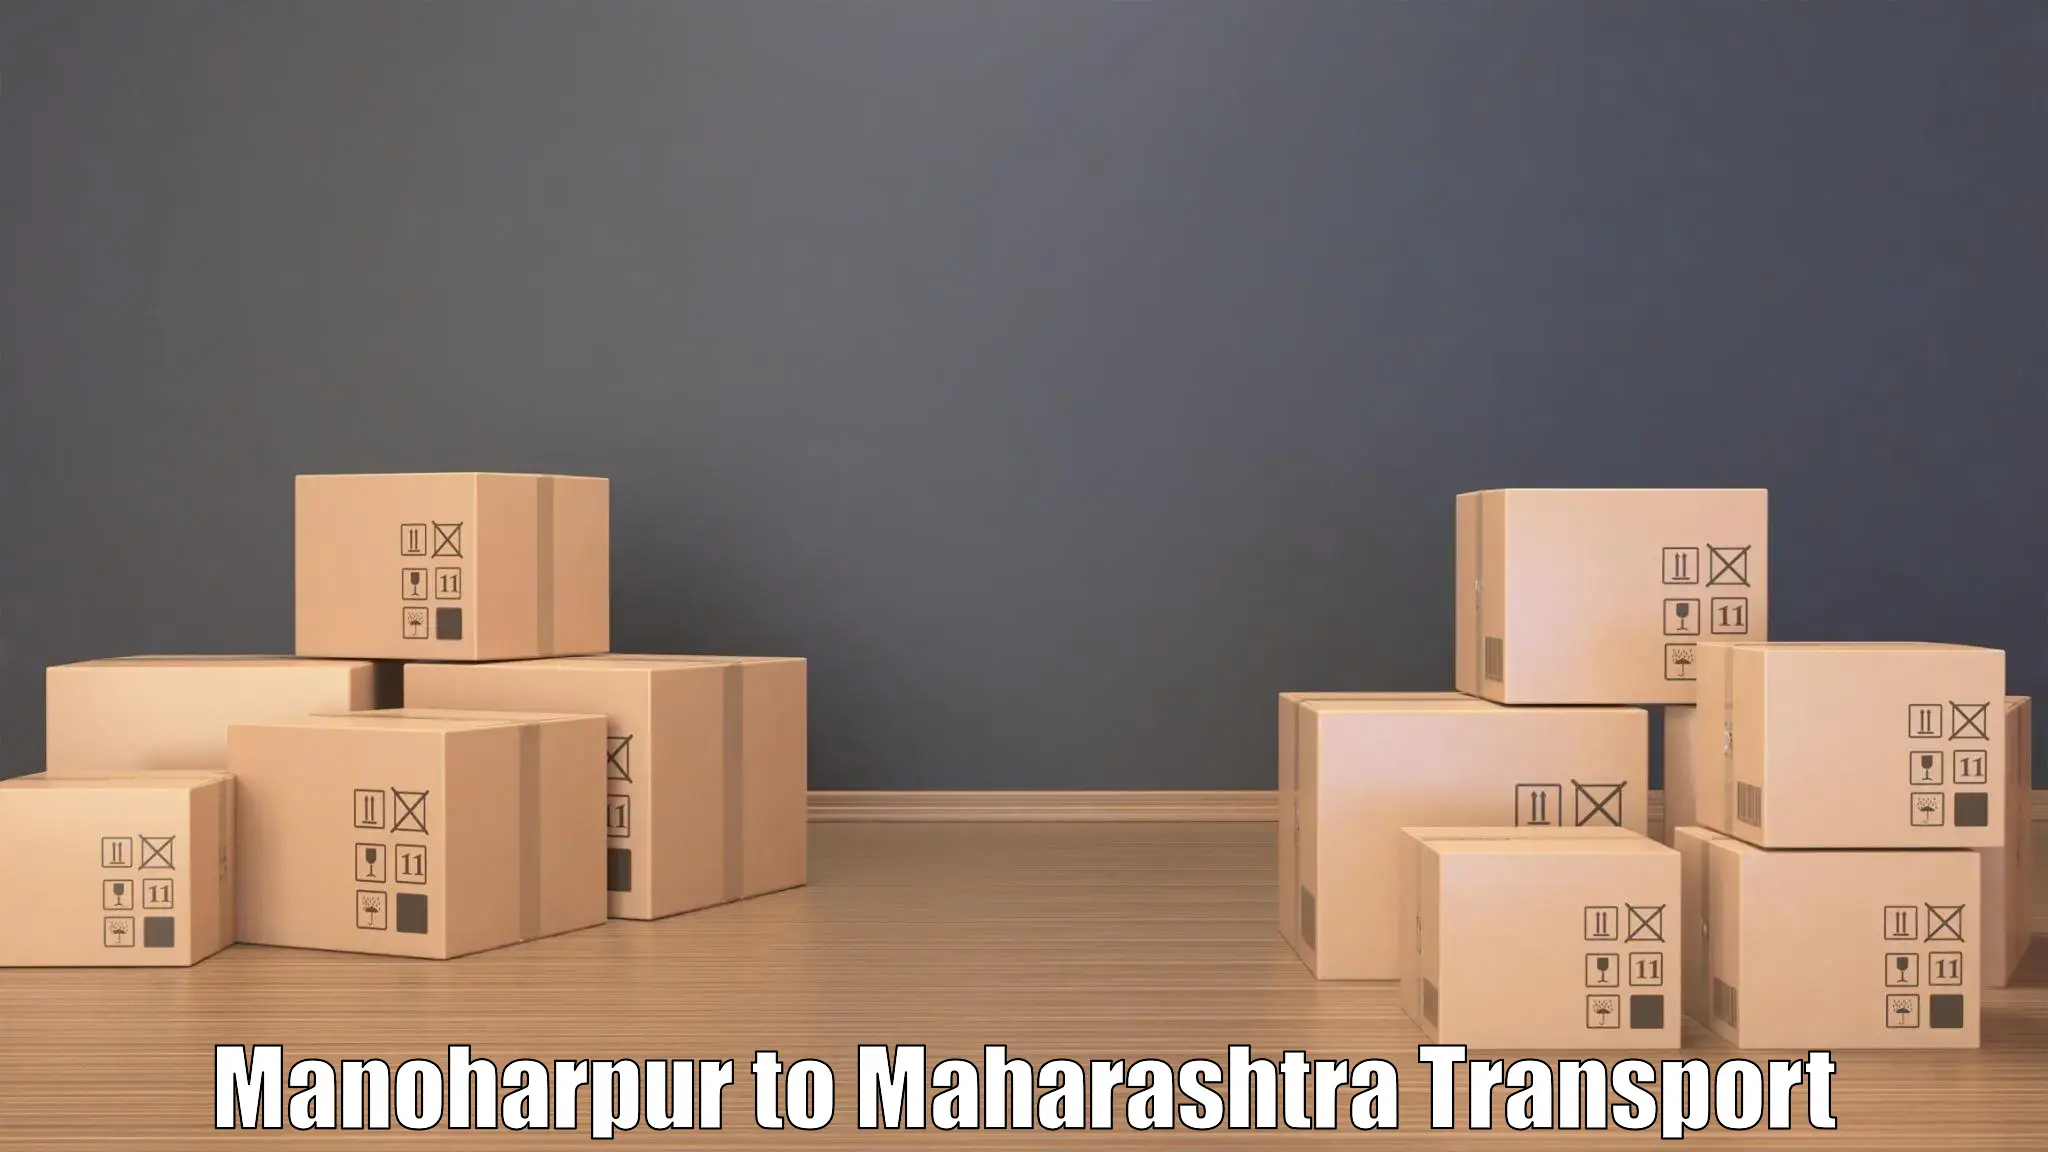 Transport bike from one state to another Manoharpur to Mantha